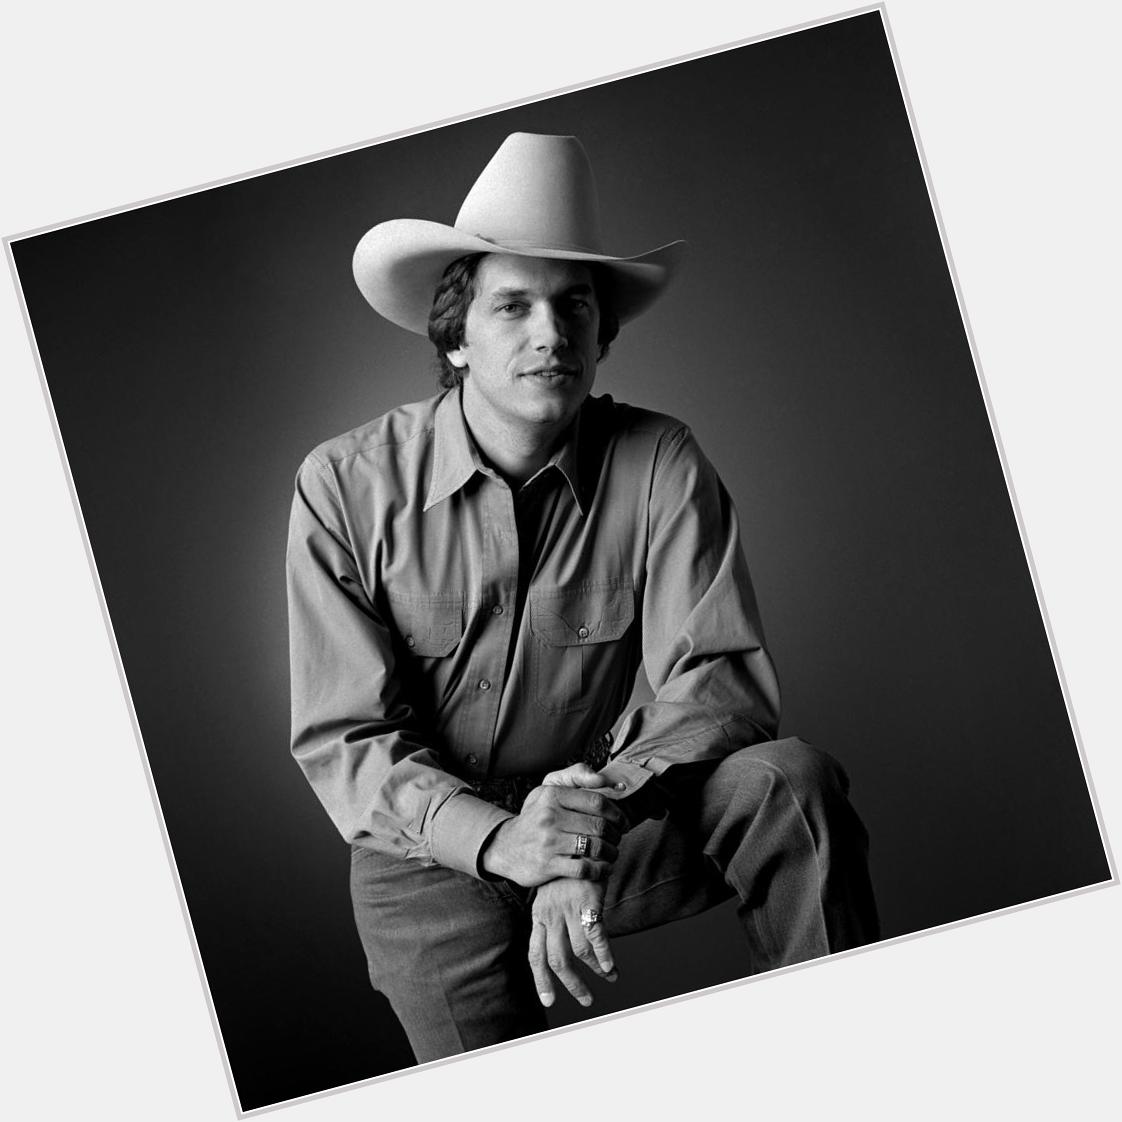 Happy birthday to one of the country music greats, George Strait! 